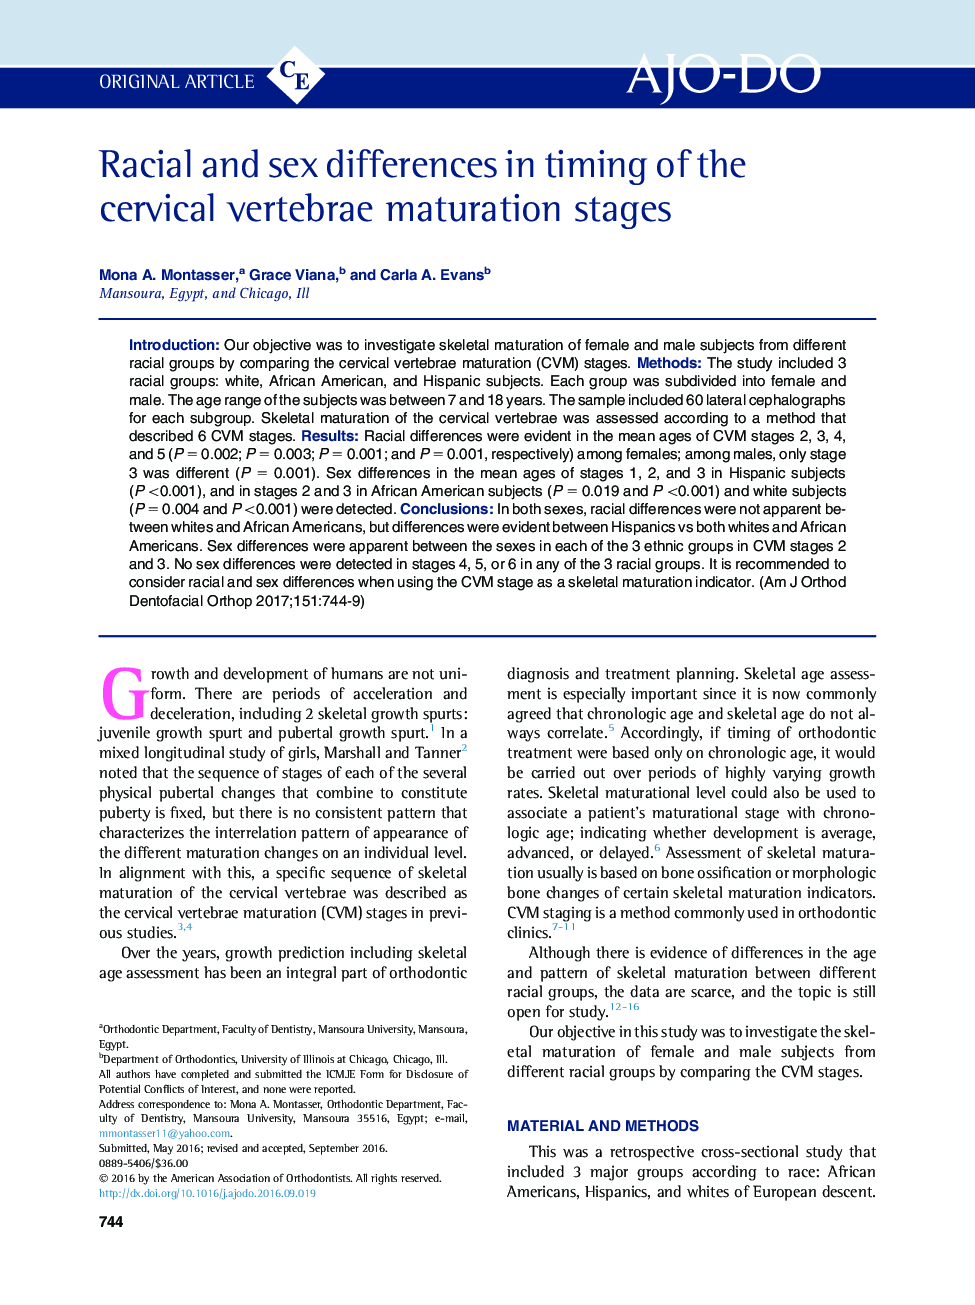 Racial and sex differences in timing of the cervical vertebrae maturation stages